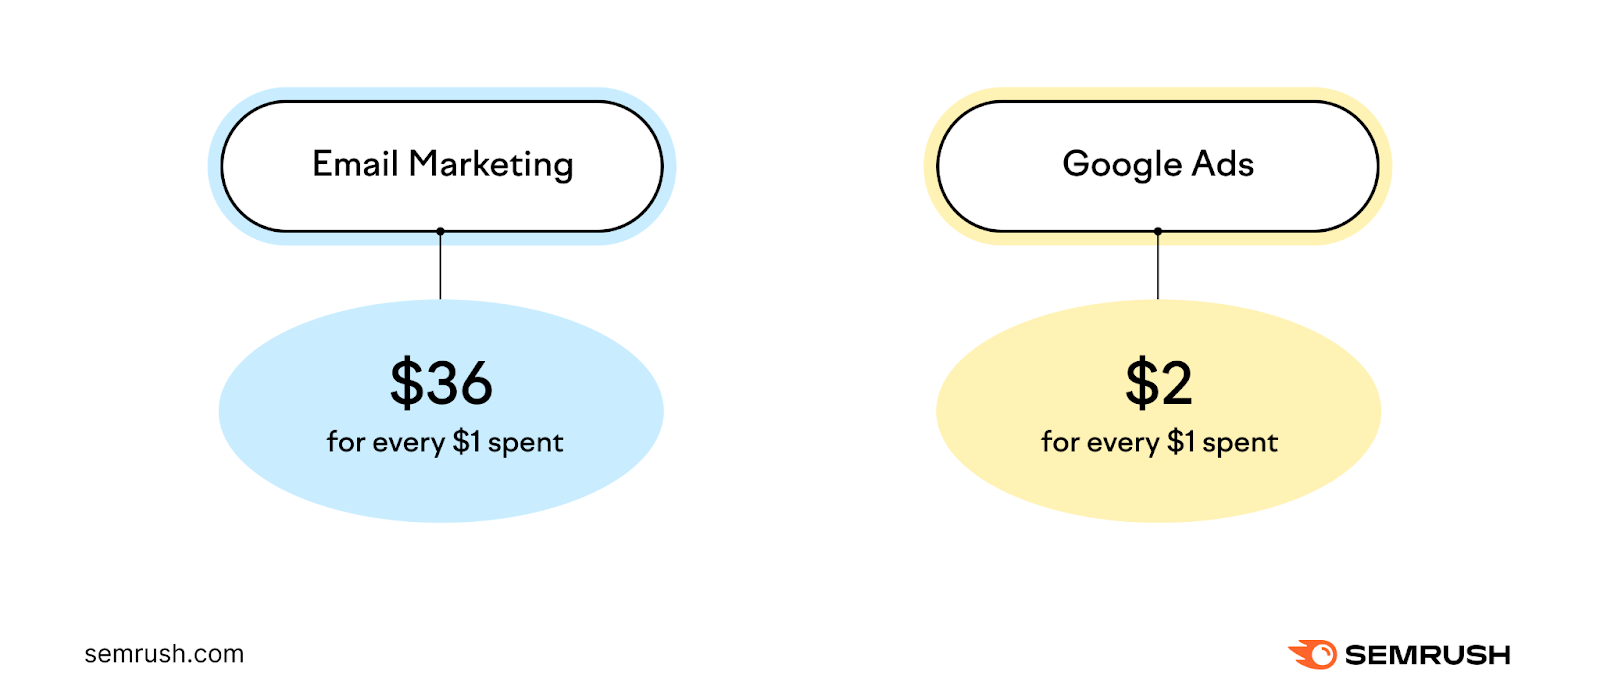 Email marketing and Google ads spend